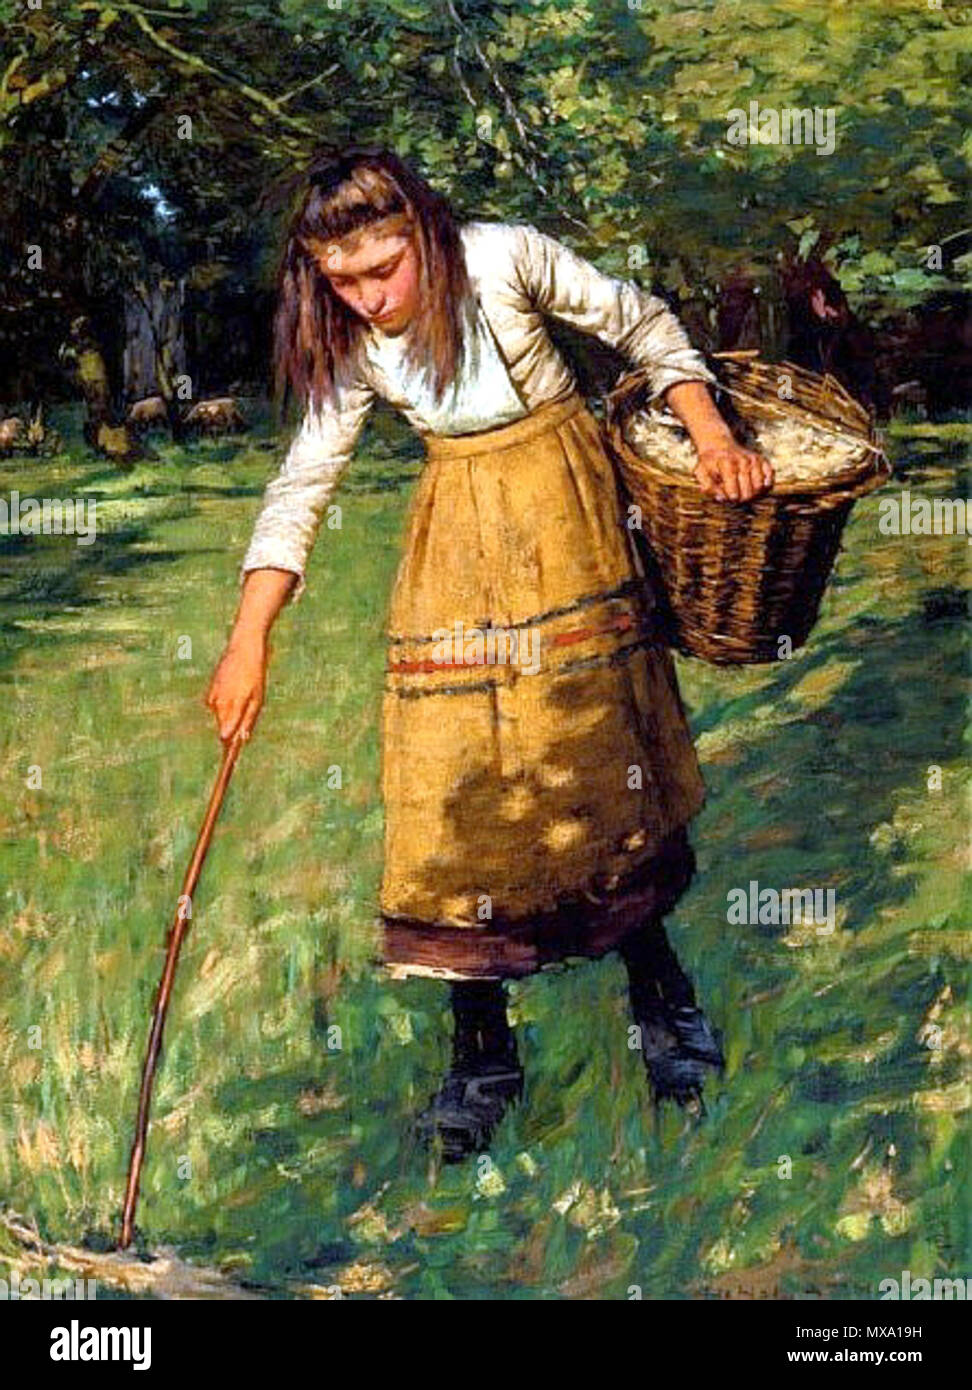 . Gathering Wool . Unknown date.    Henry Herbert La Thangue  (1859–1929)     Alternative names Henry Herbert LaThangue; Henry La Thangue; Henry Herbert la Thangue; Henry Herbert Lathangue; La Thangue  Description English painter Realist painter and associated with the Newlyn School  Date of birth/death 19 September 1859 21 December 1929  Location of birth/death London London  Work location Bretagne, London, Category:Norfolk  Authority control  : Q1606851 VIAF: 25469415 ISNI: 0000 0000 6681 1384 ULAN: 500004645 LCCN: n89654016 WGA: LA THANGUE, Henry Herbert WorldCat 274 Henry Herbert La Thangu Stock Photo